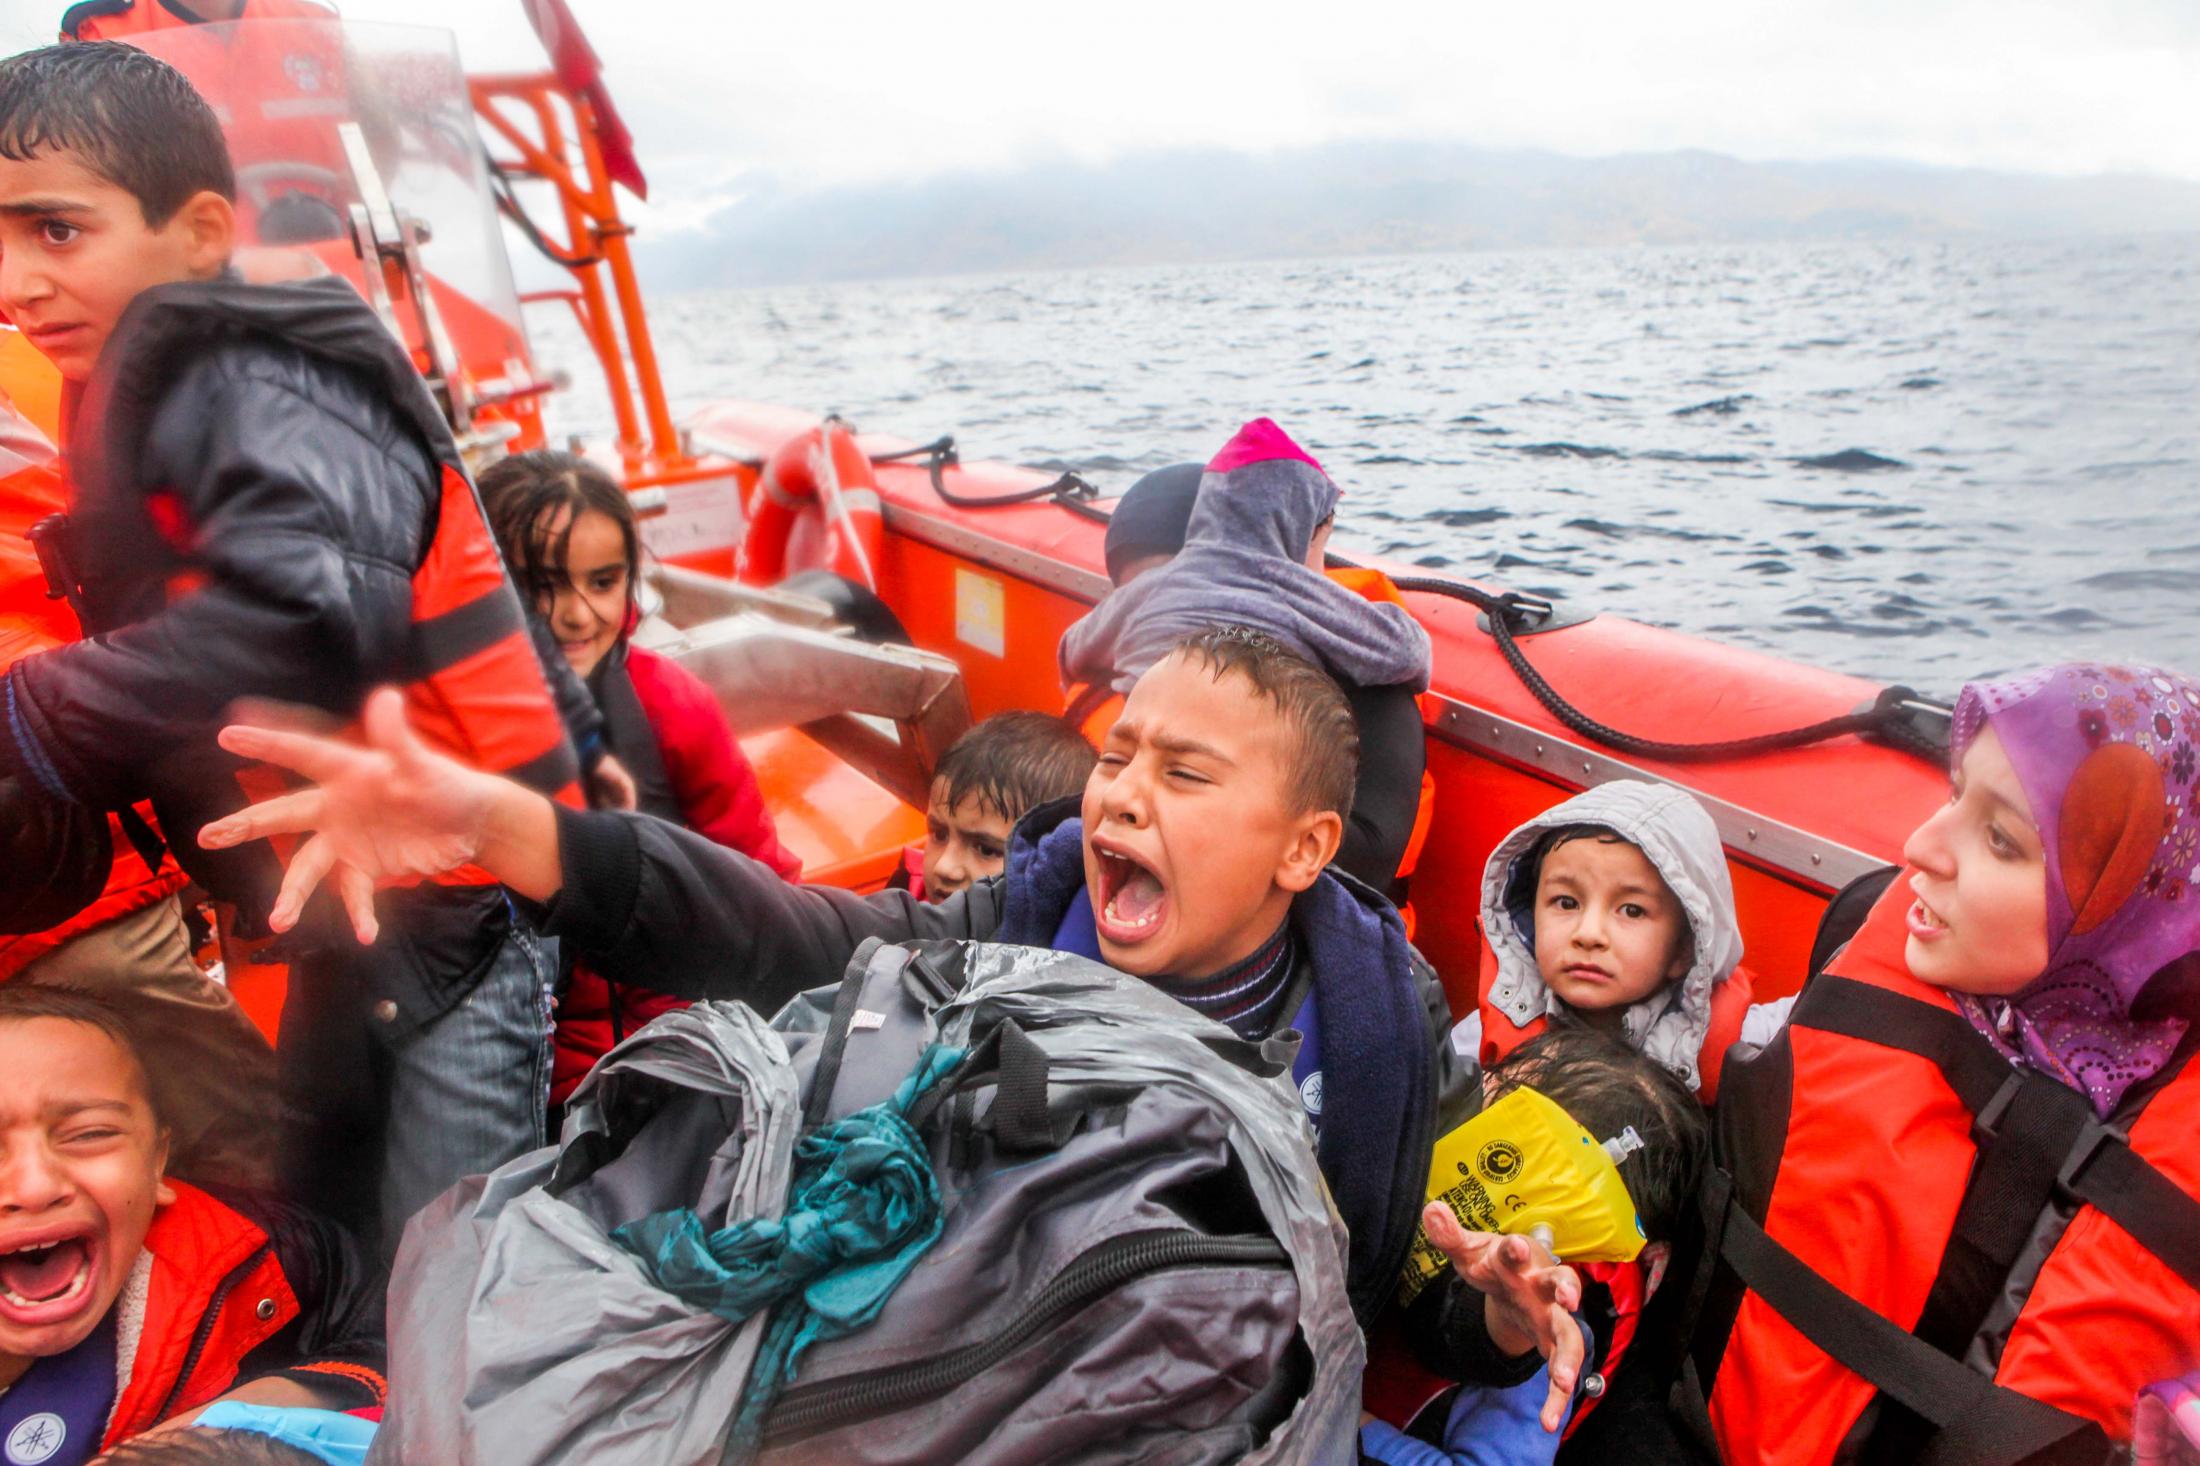 Refugees in the Aegean